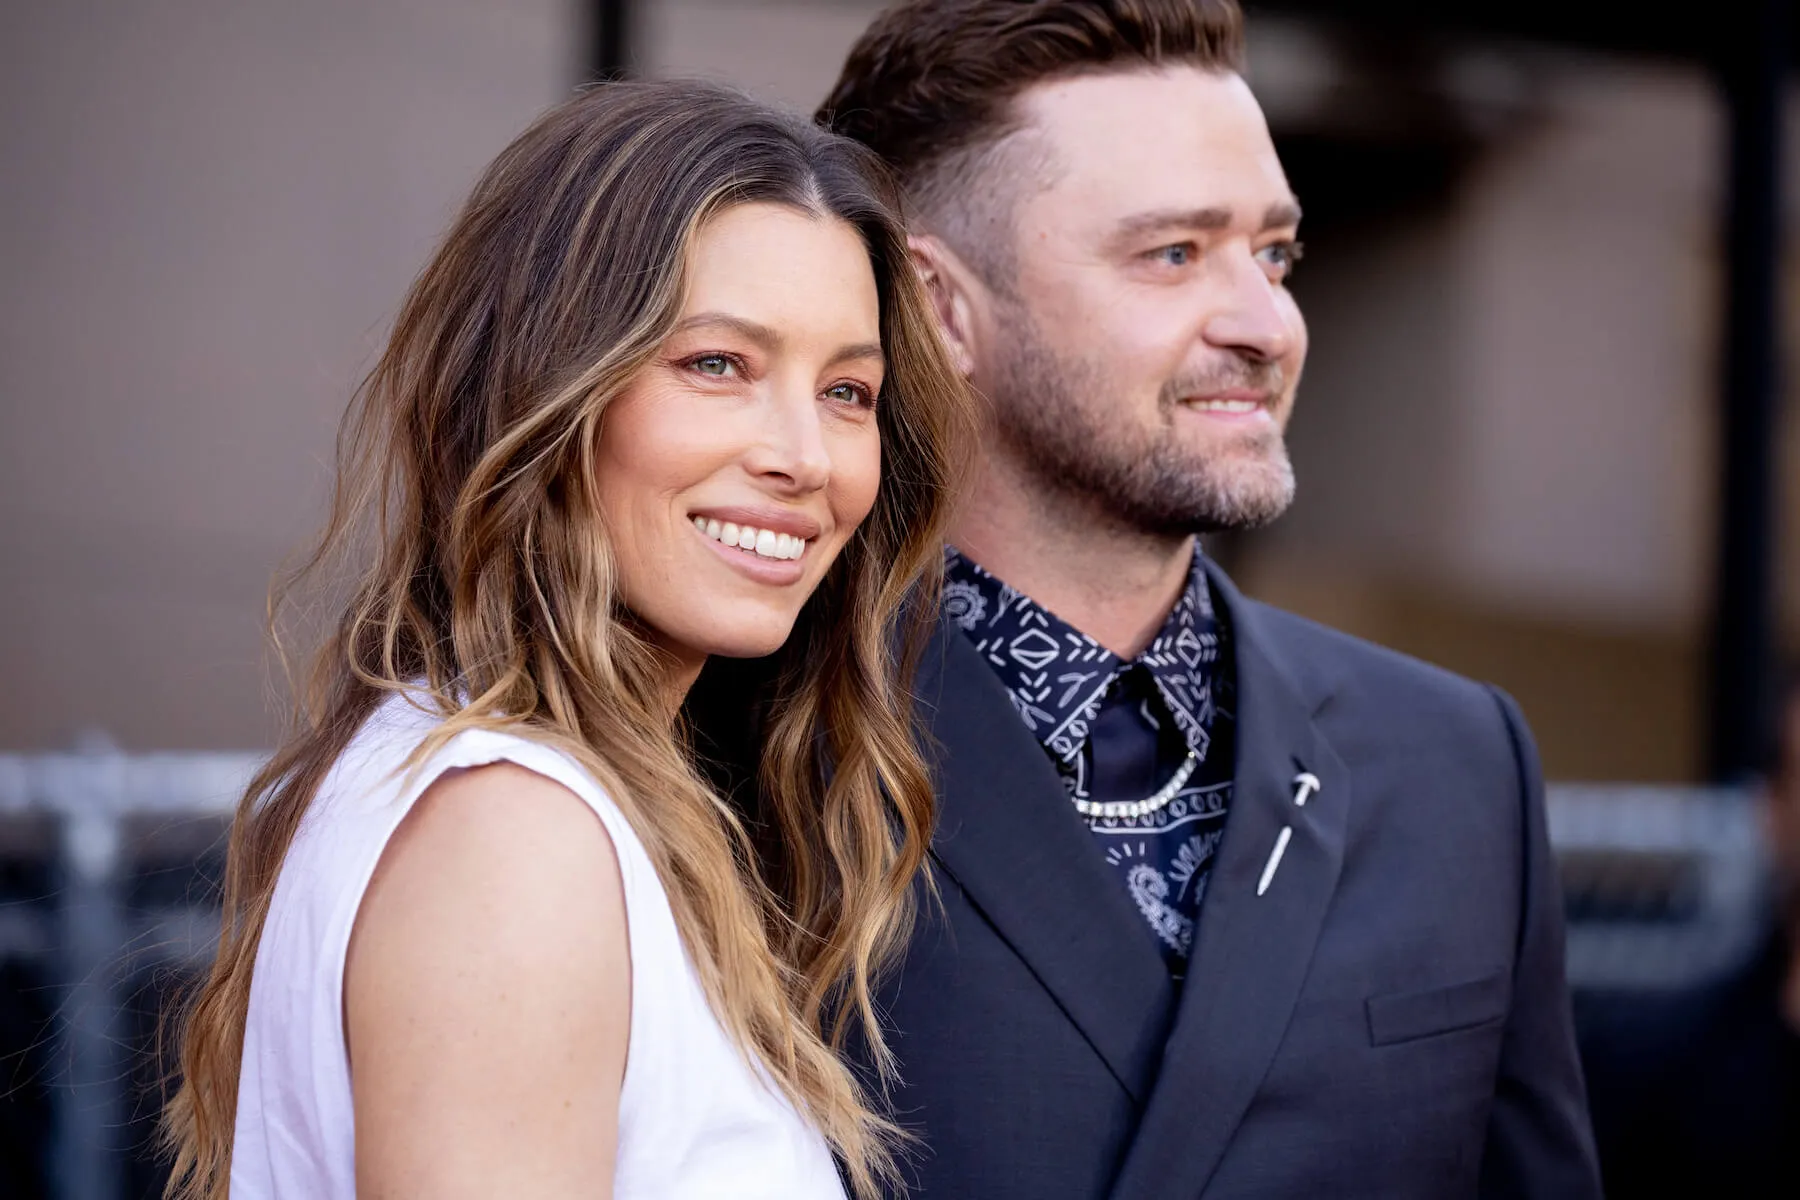 Jessica Biel smiling at a movie premiere in 2022 with Justin Timberlake slightly out of focus to her side